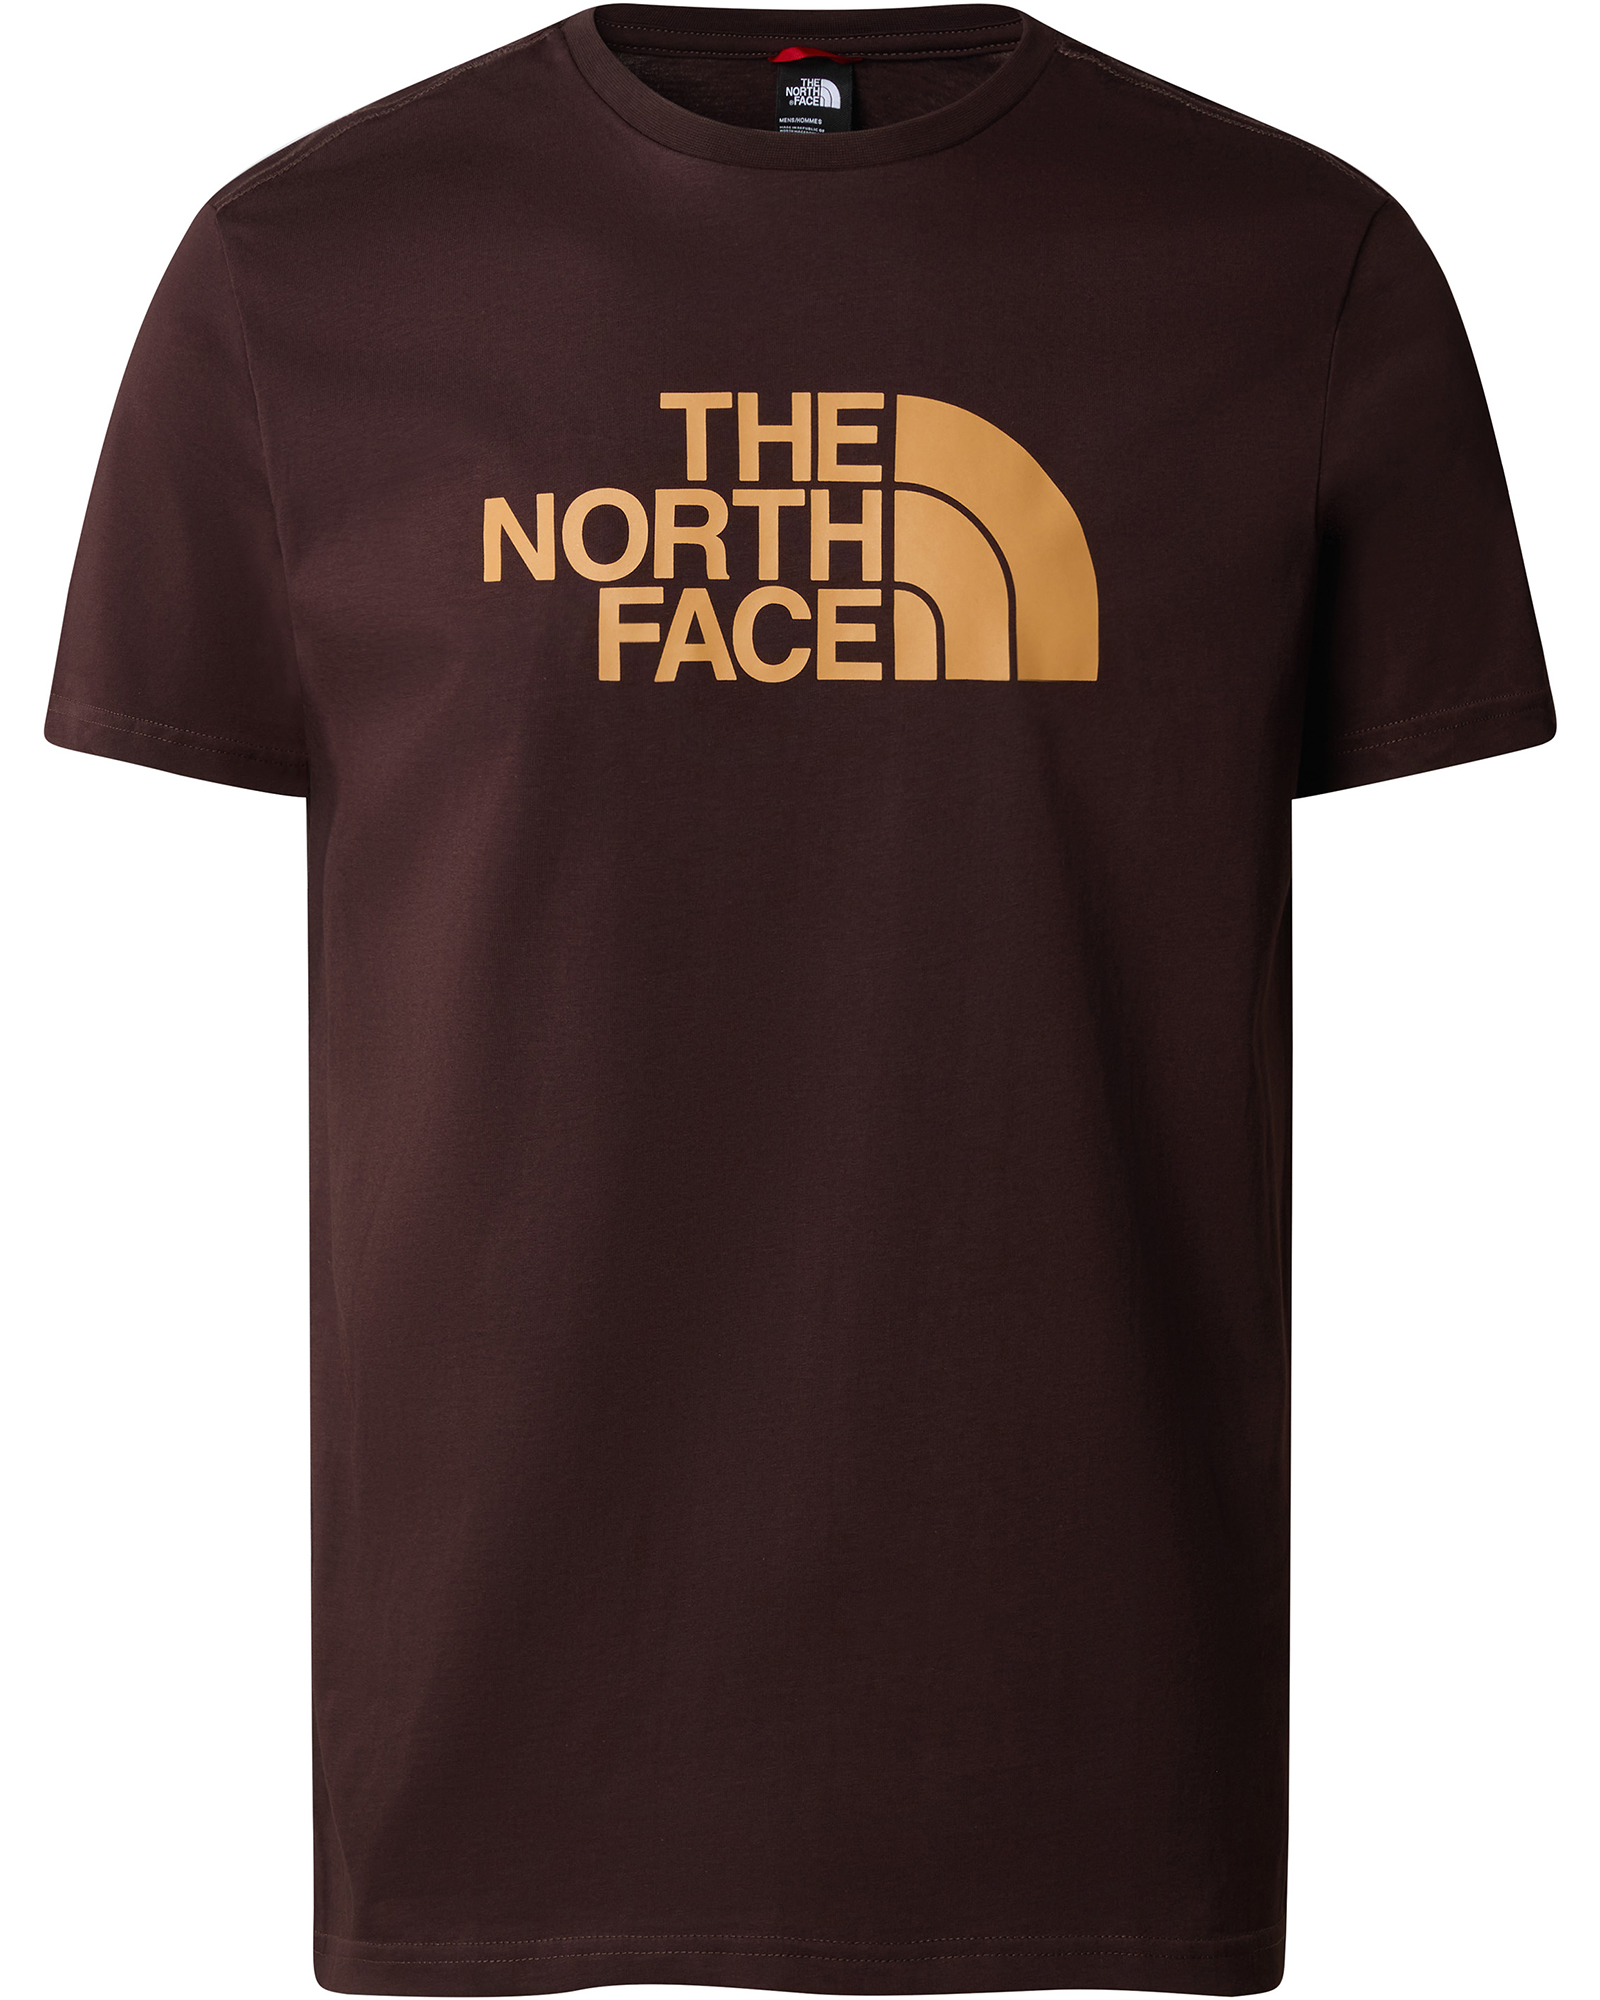 The North Face Easy Men’s T Shirt - Coal Brown-Almond Butter S